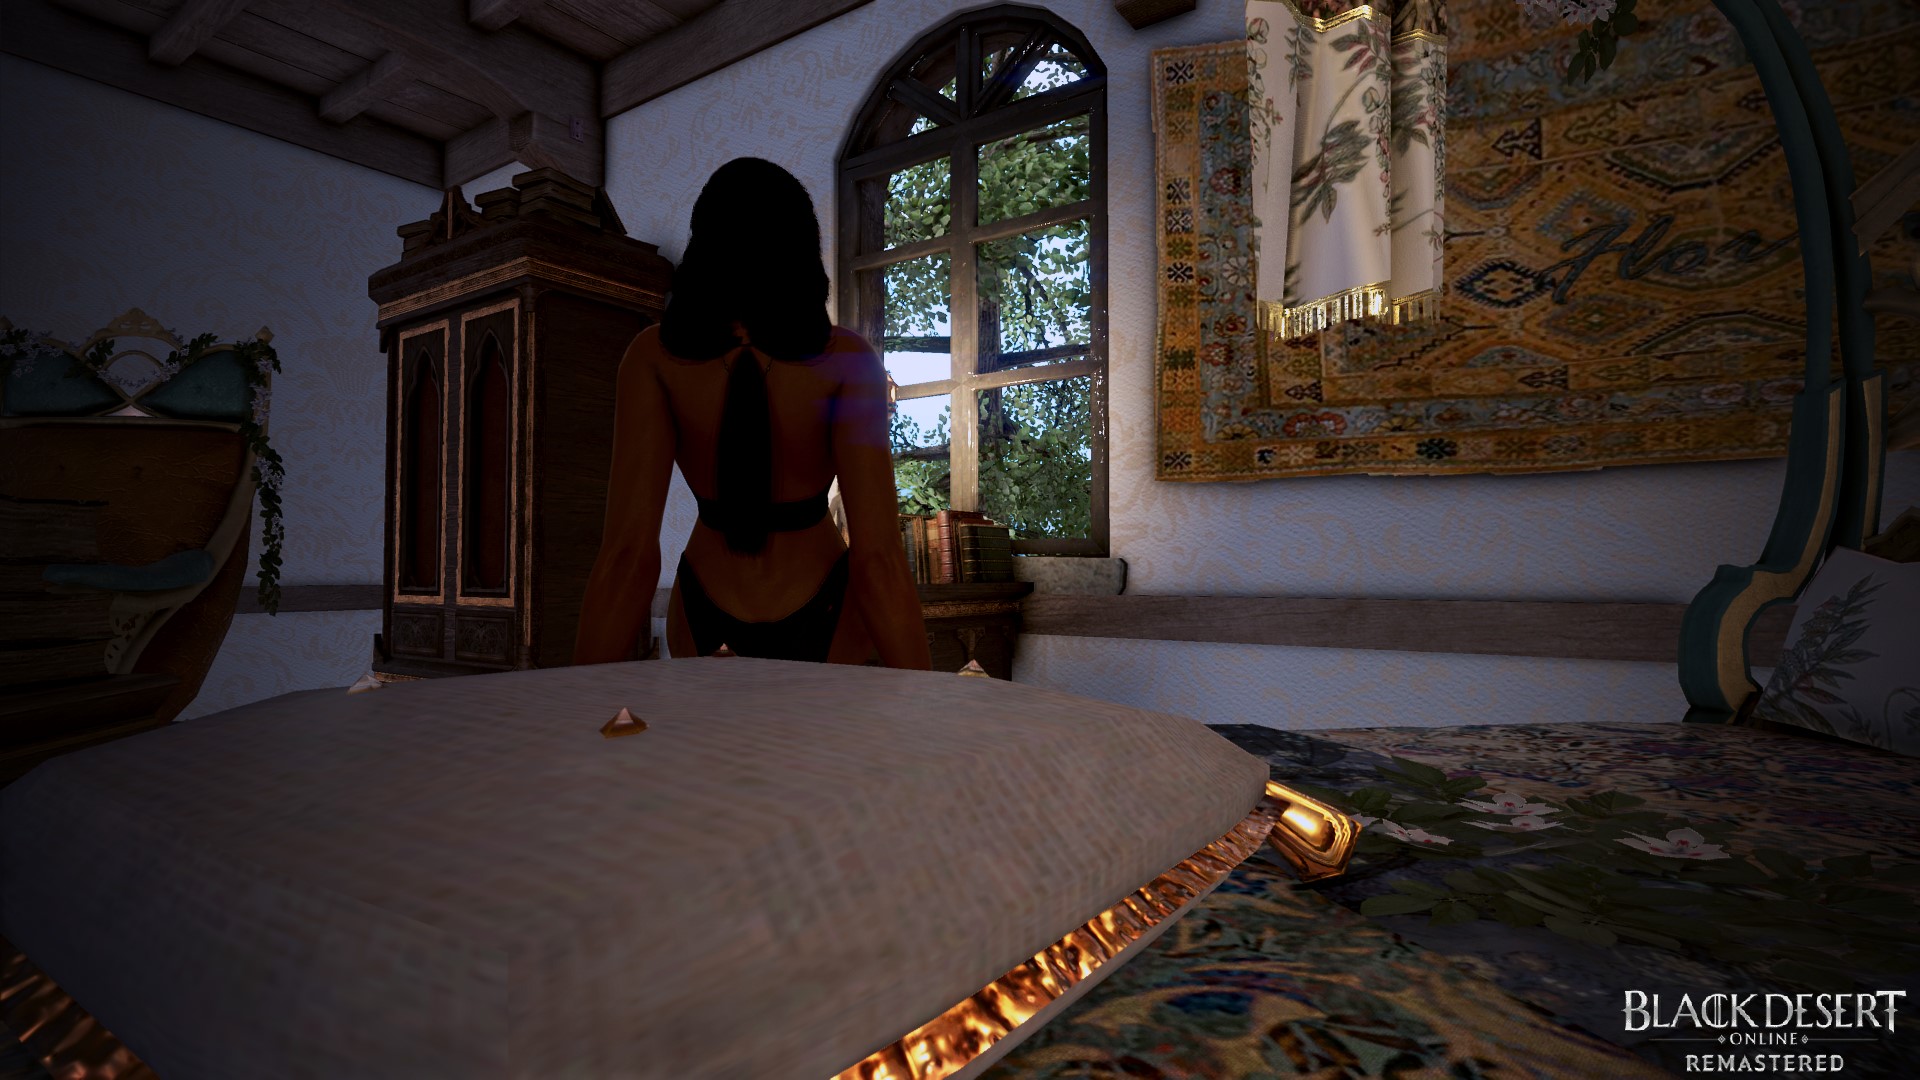 General 1920x1080 Black Desert Online screen shot video game girls video game art video game characters fantasy girl rangers window bed cushions black outfits back Chill Out ass curvy underwear sitting rear view